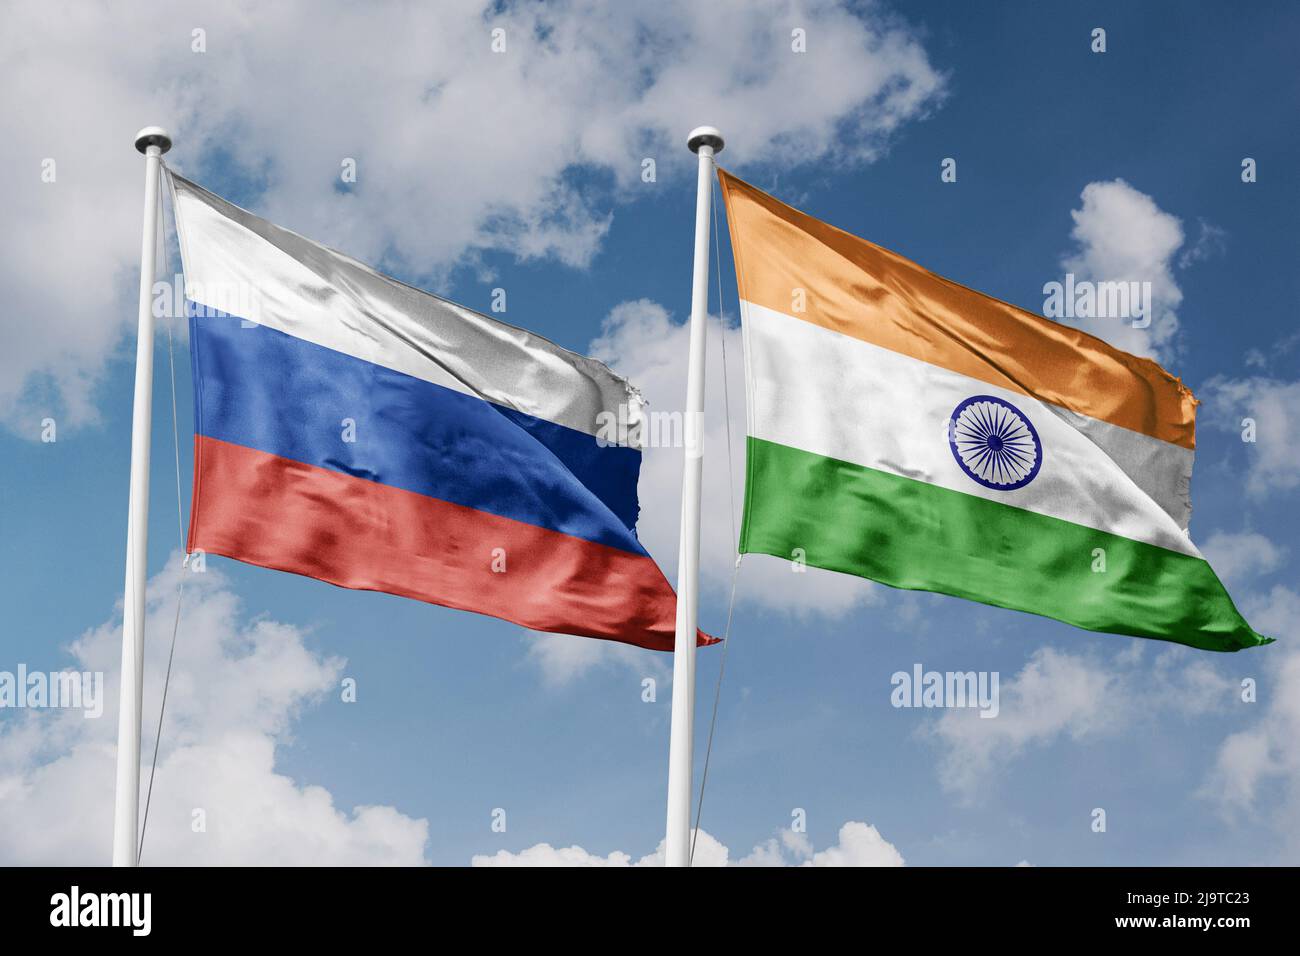 Russia and India two flags on flagpoles and blue cloudy sky background Stock Photo